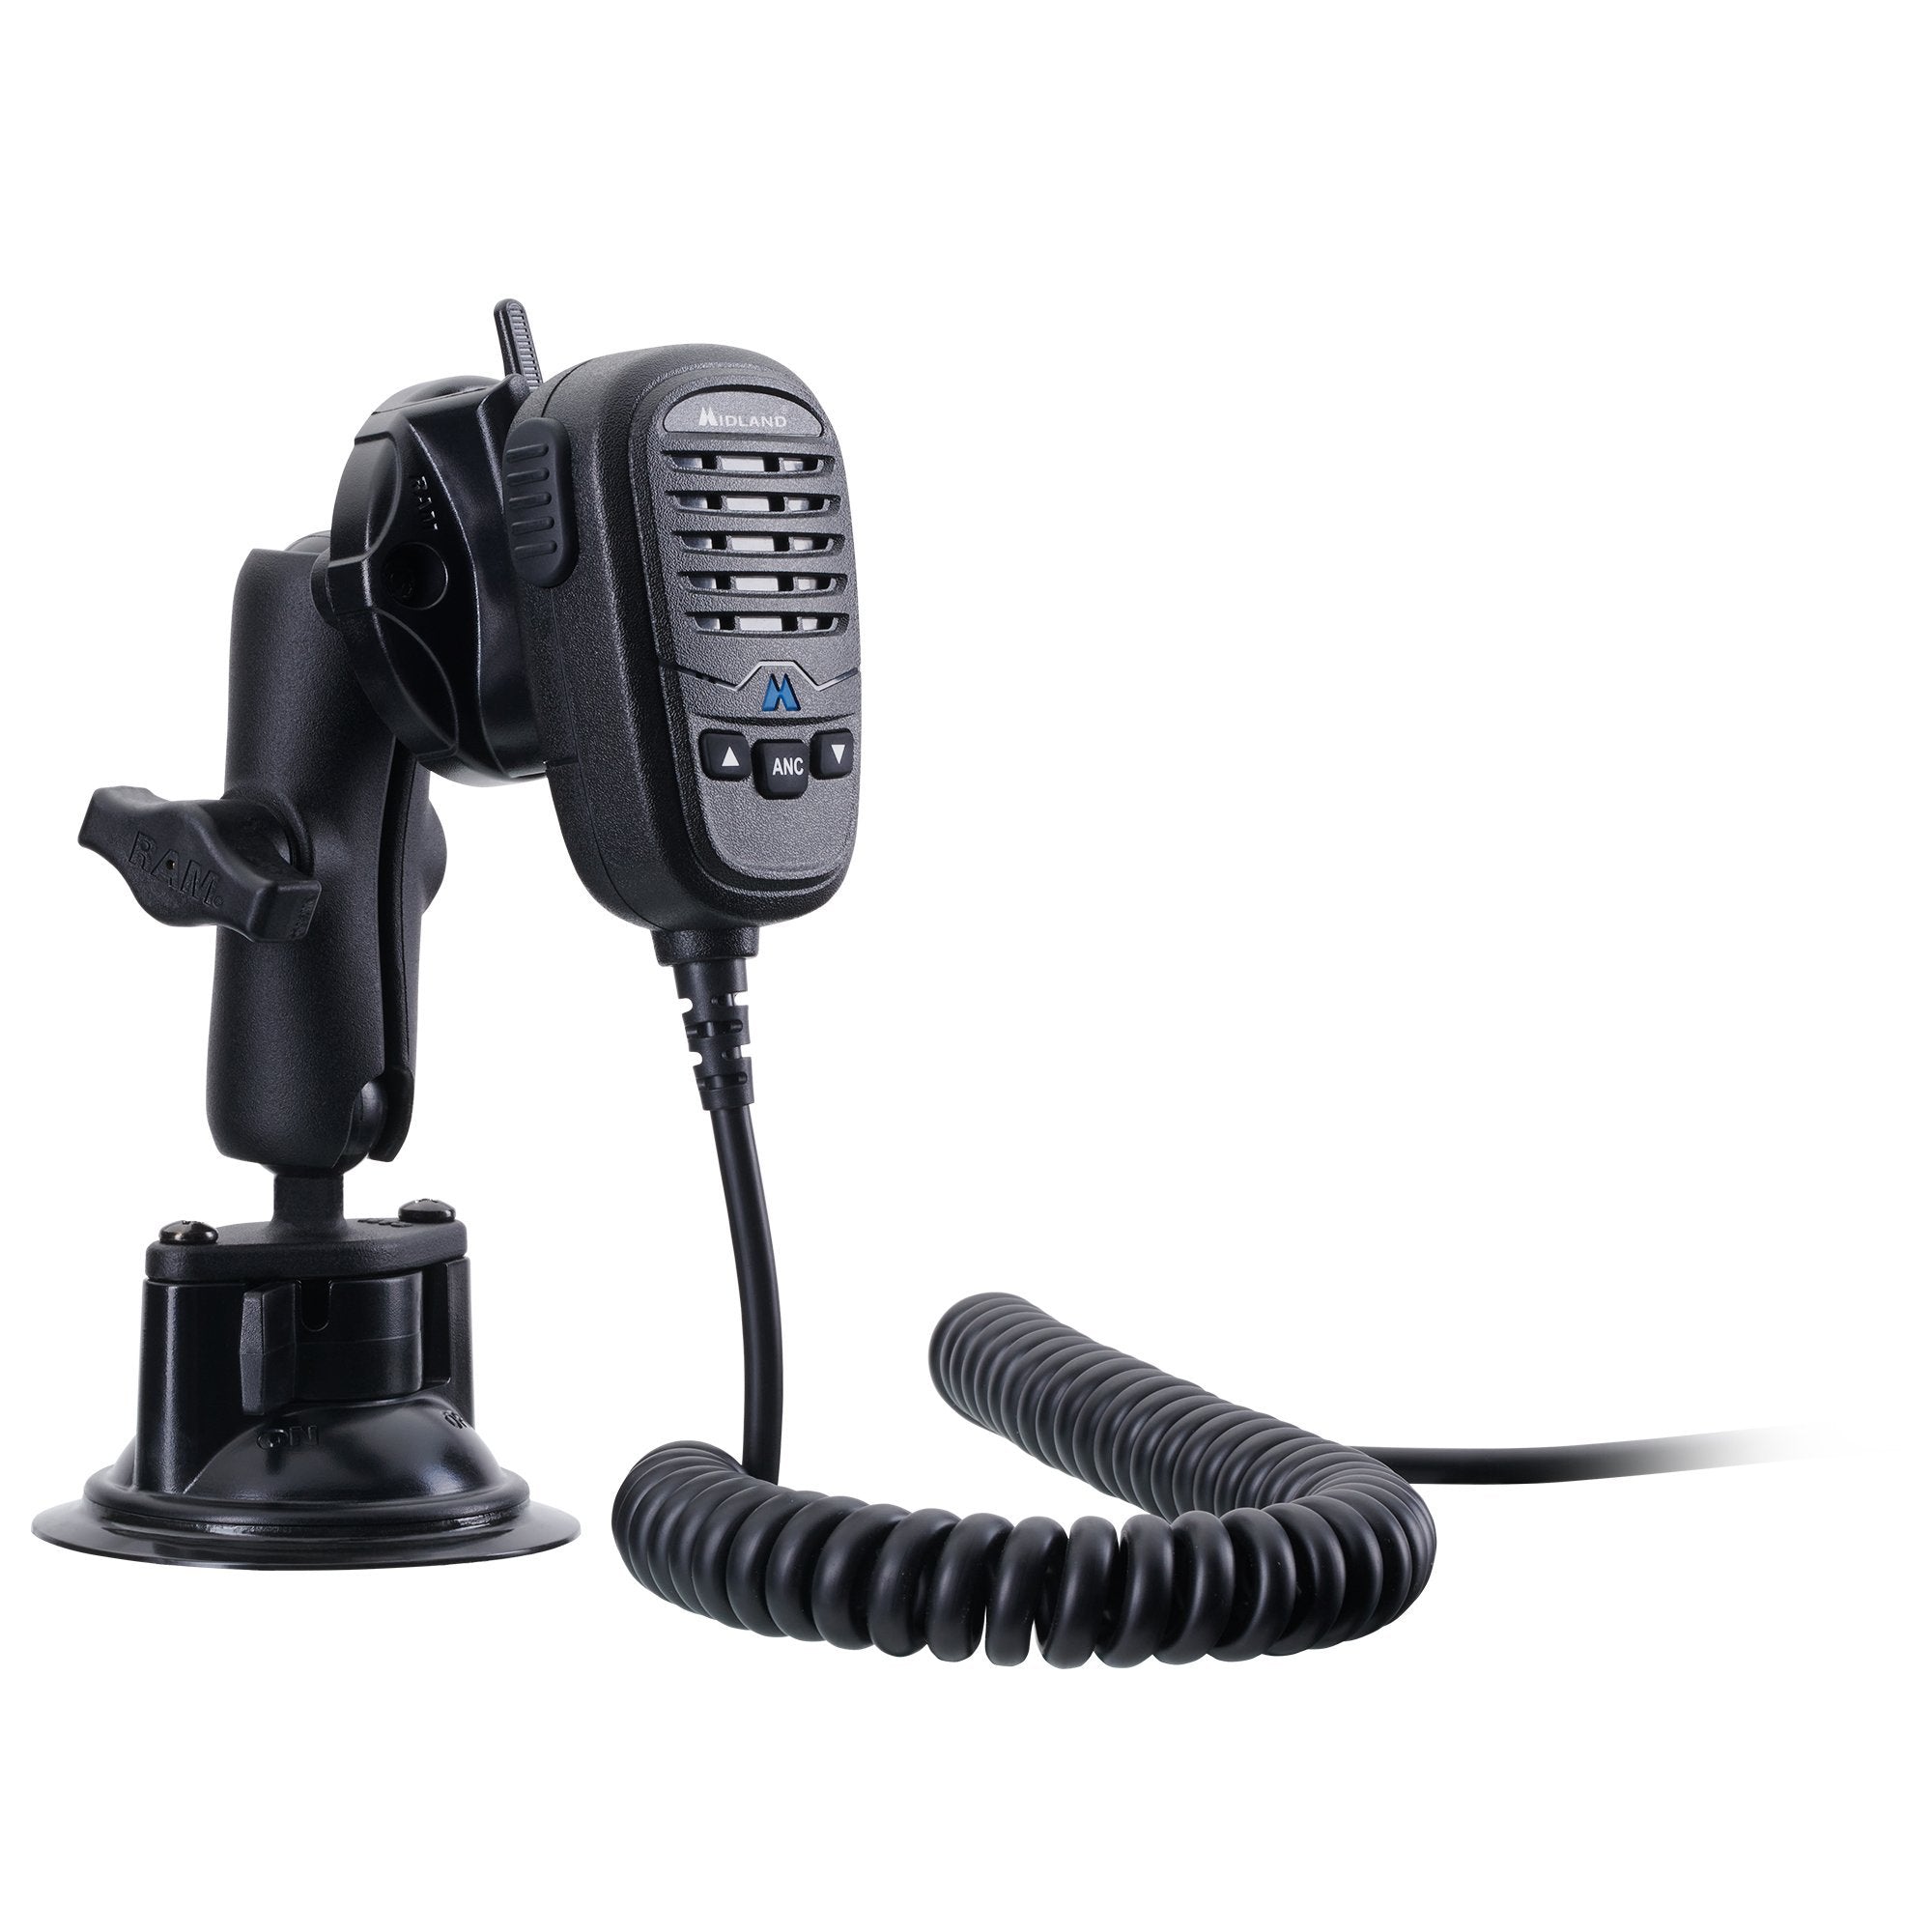 MICROMOBILE® MXTARM5 SUCTION CUP MIC MOUNT